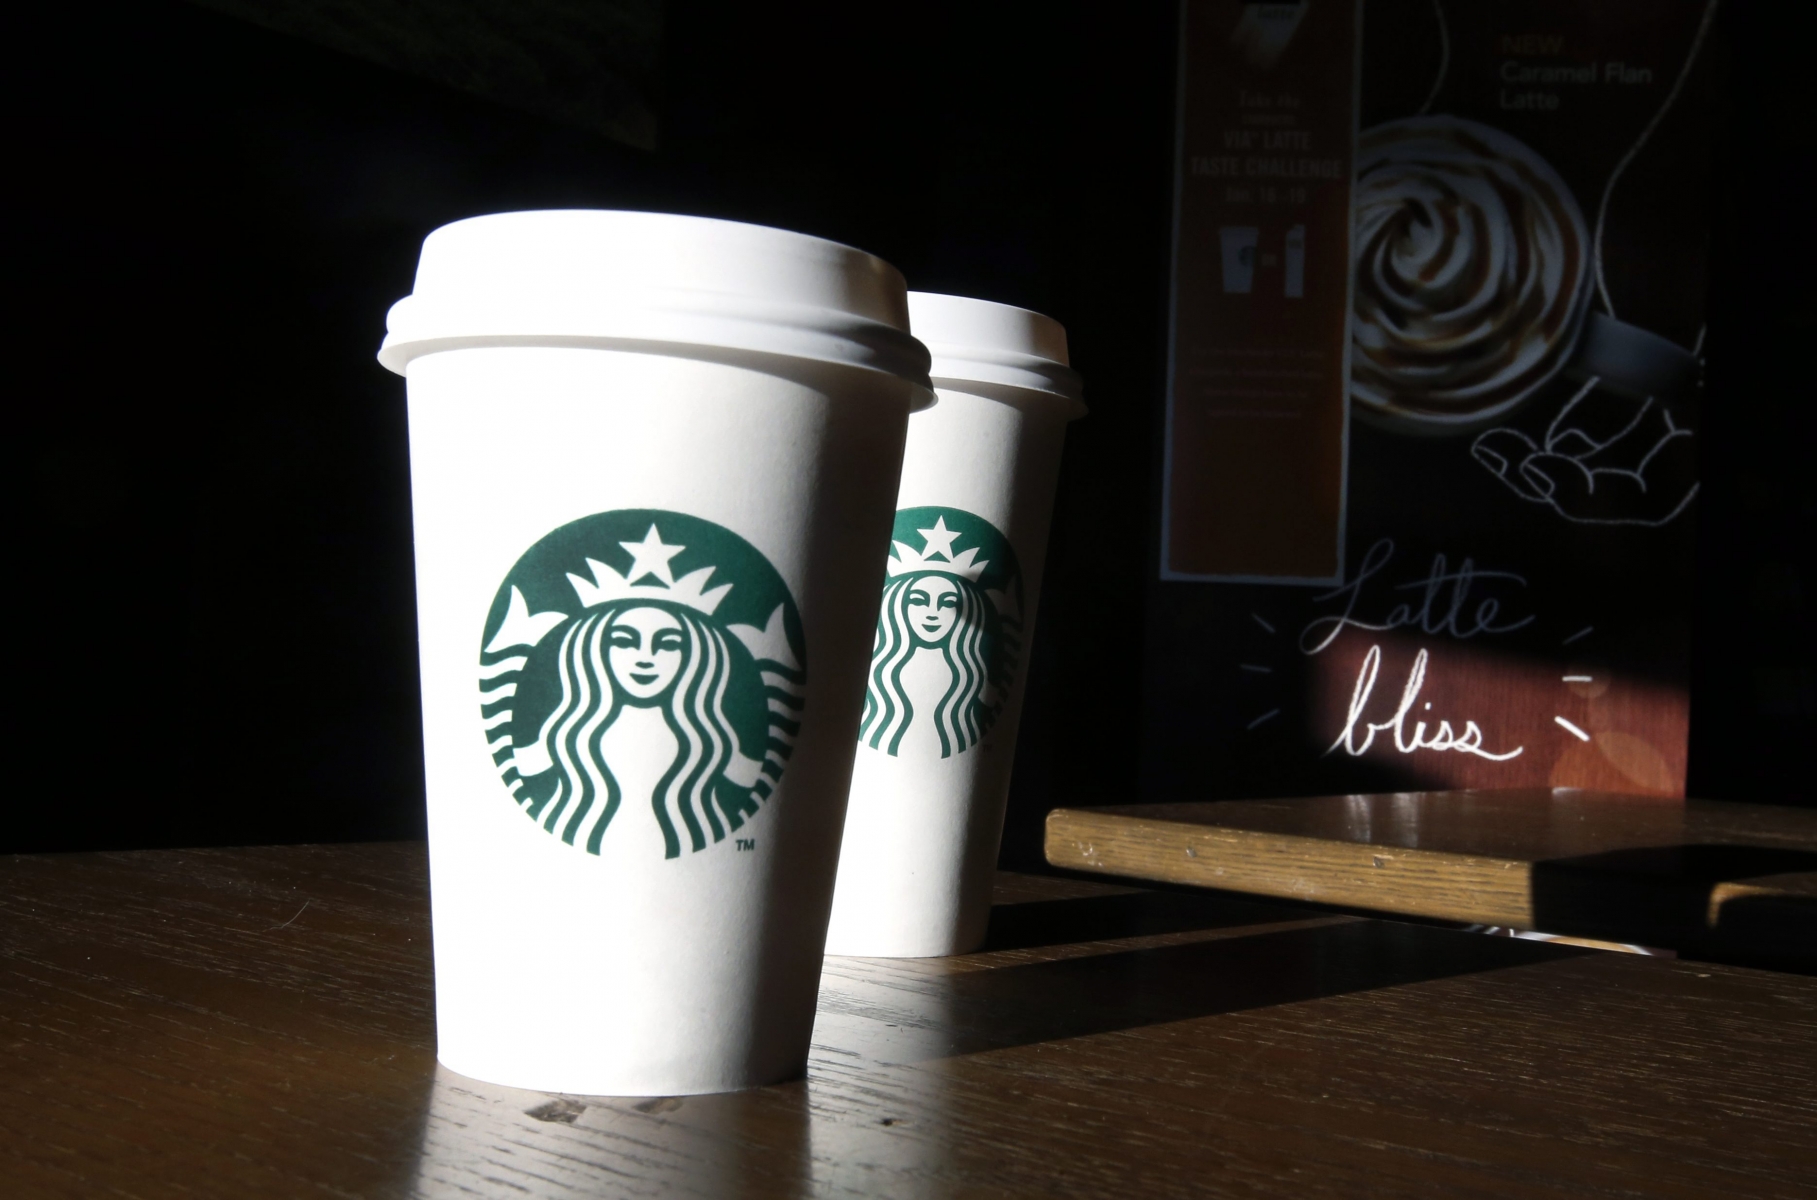 This Friday, Jan. 17, 2014,  photo, shows Starbucks mugs in a cafe in North Andover, Mass. Starbucks reports quarterly earnings on Thursday, Jan. 23, 2014. (AP Photo/Elise Amendola)